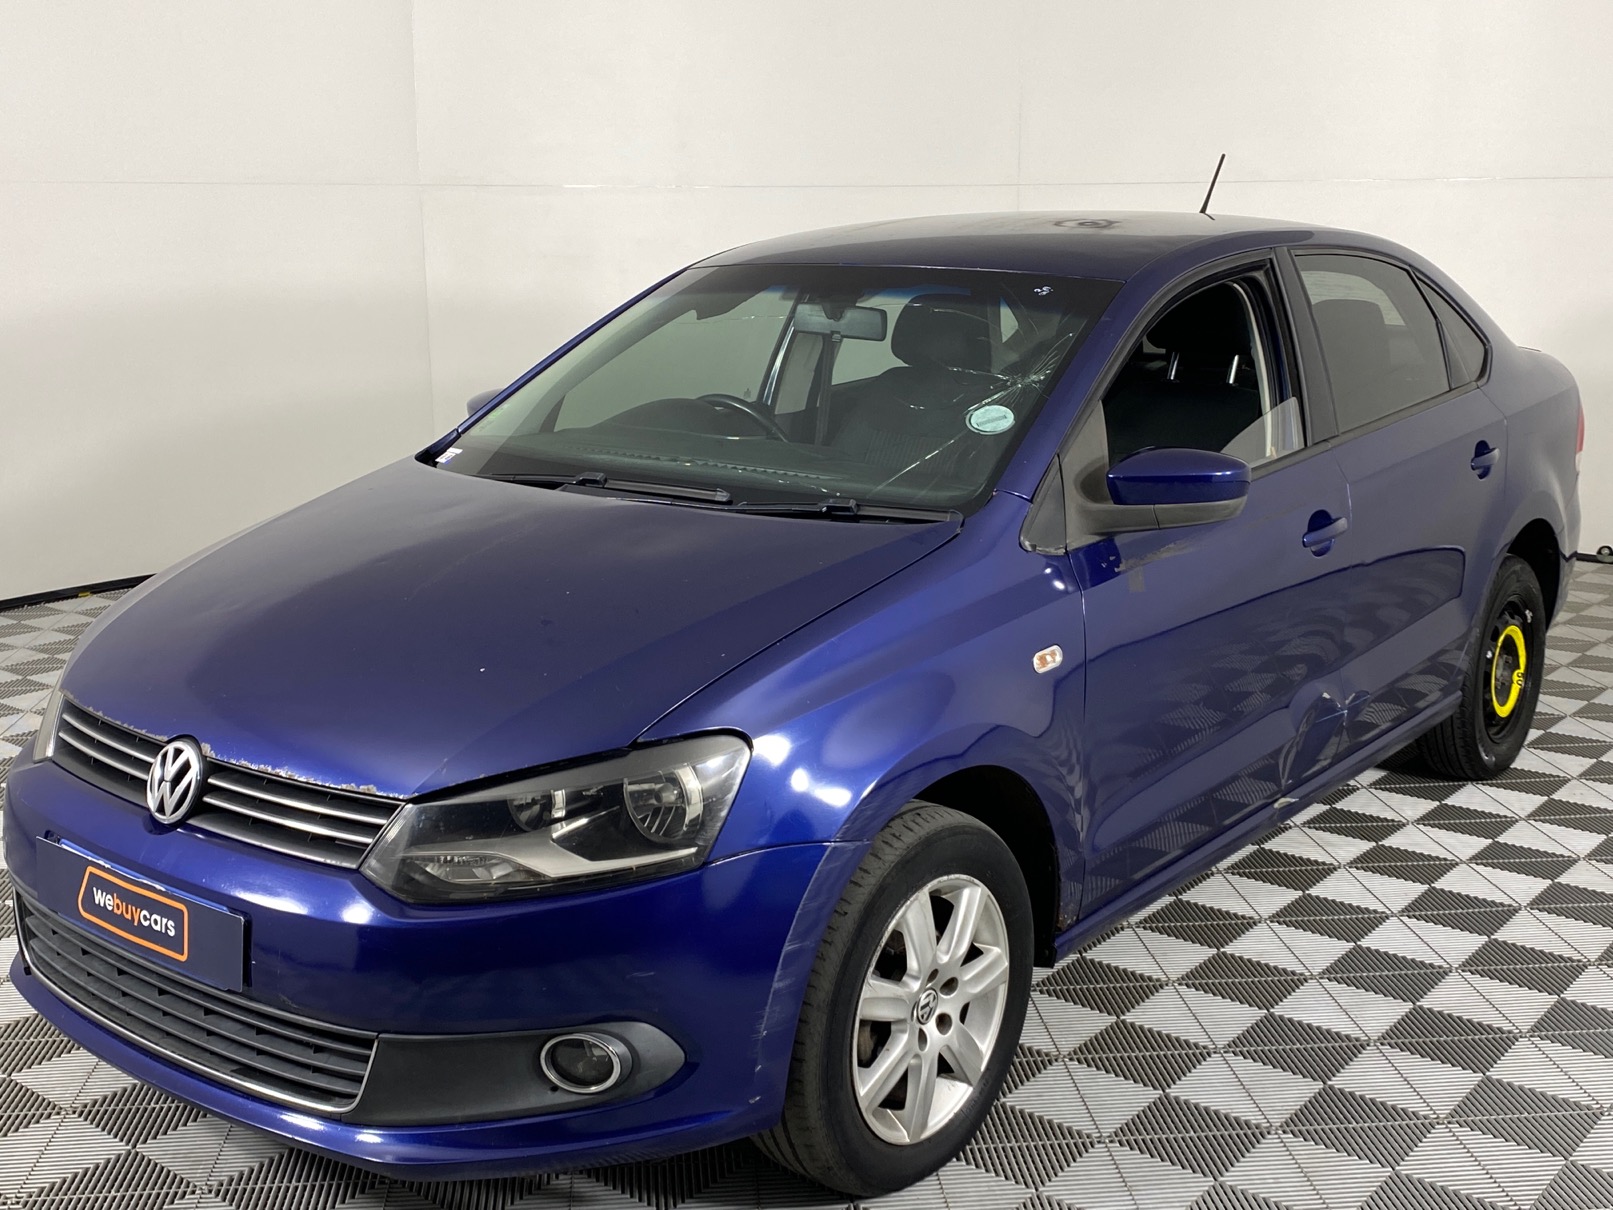 Used 2012 Volkswagen Polo Classic Polo 1 4 Comfortline for sale WeBuyCars